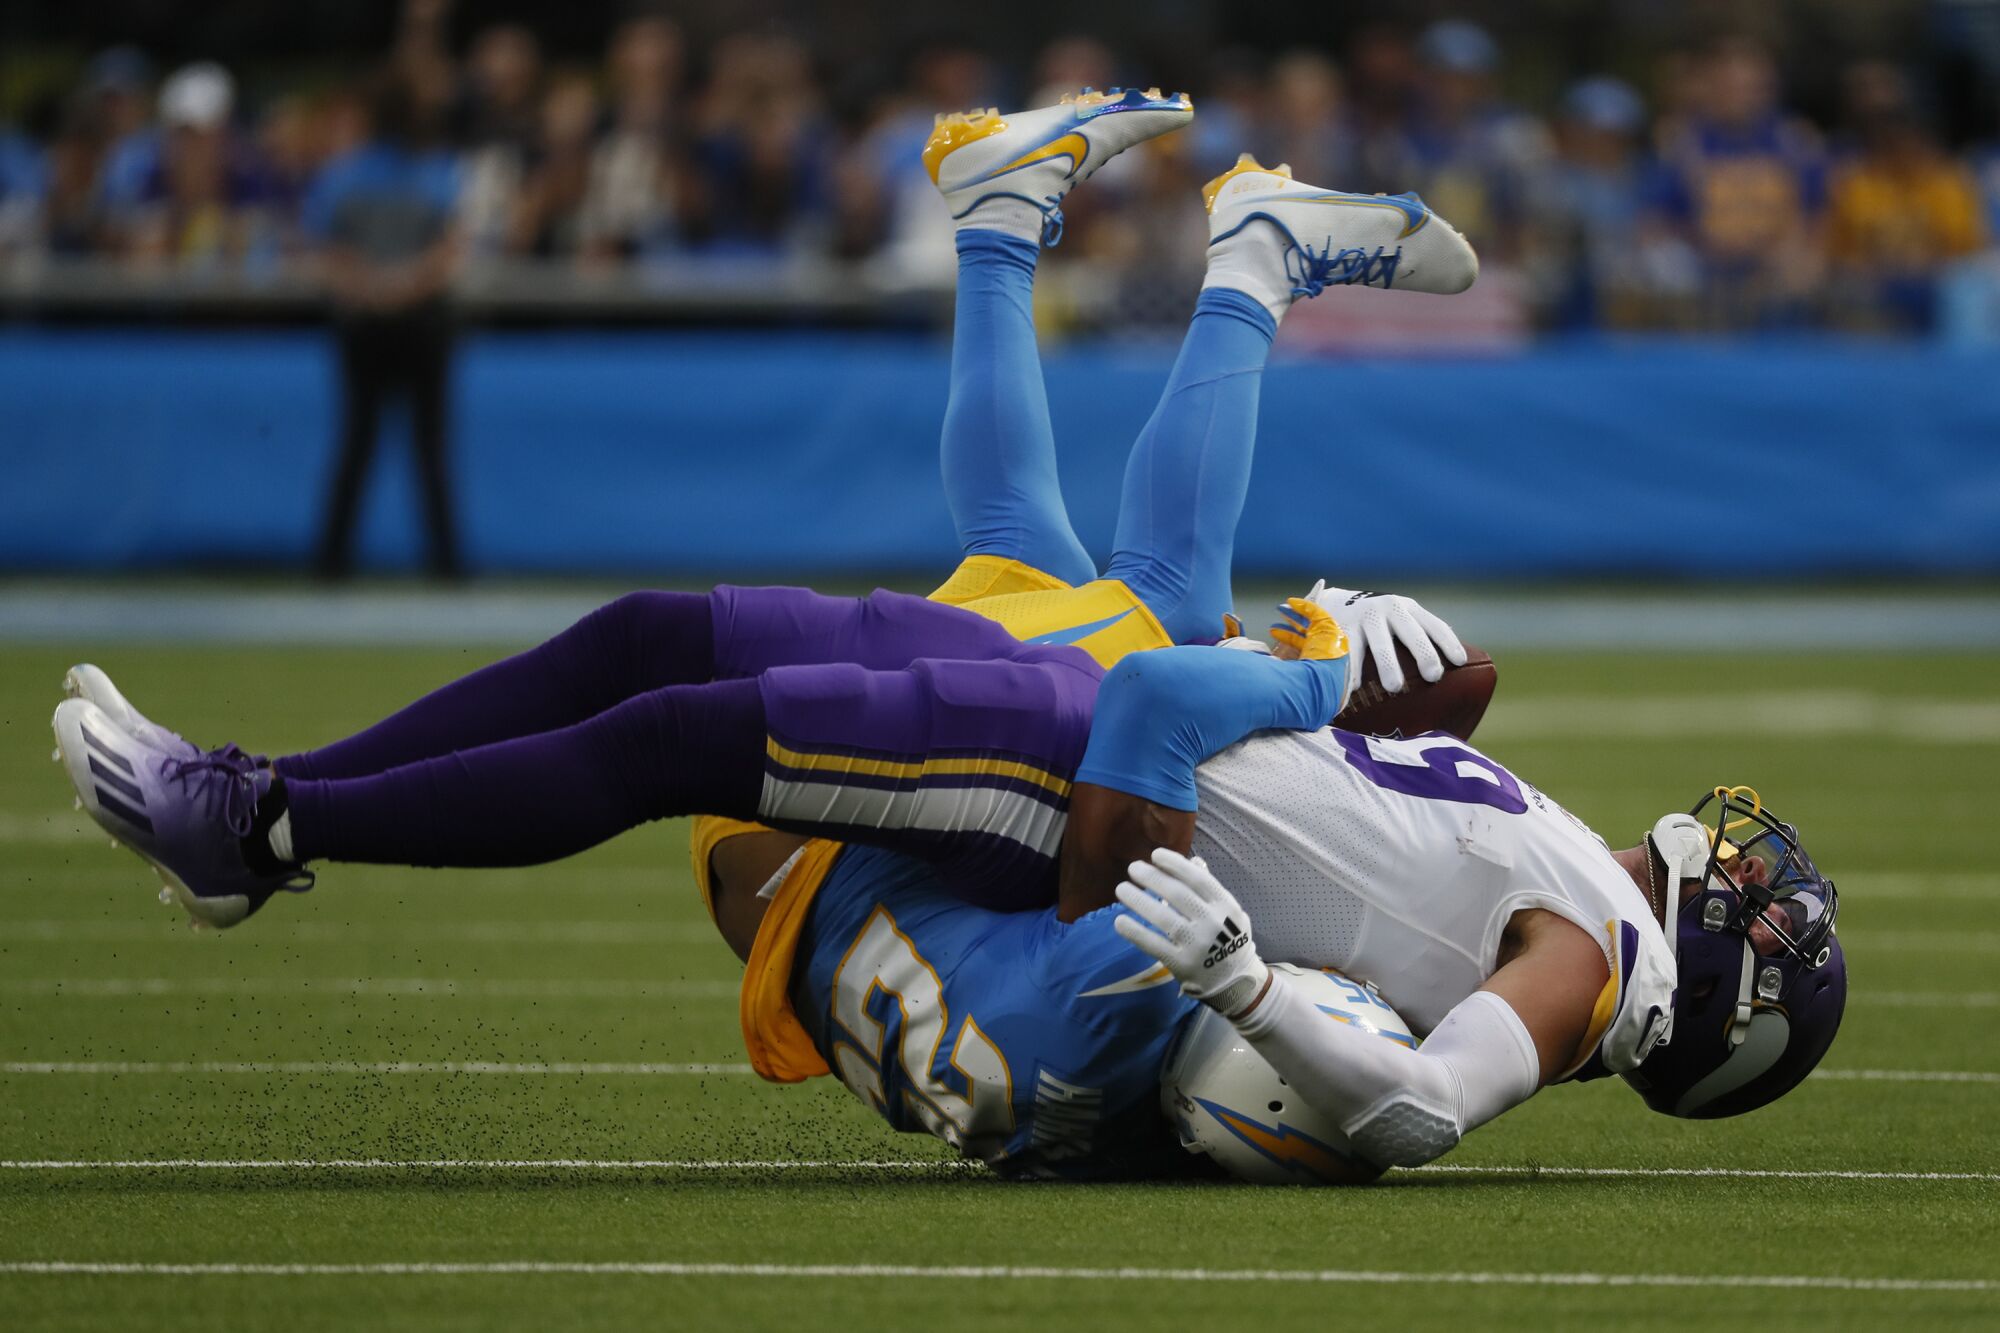 Minnesota Vikings wide receiver Adam Thielen is tackled by Chargers cornerback Chris Harris in the first half.